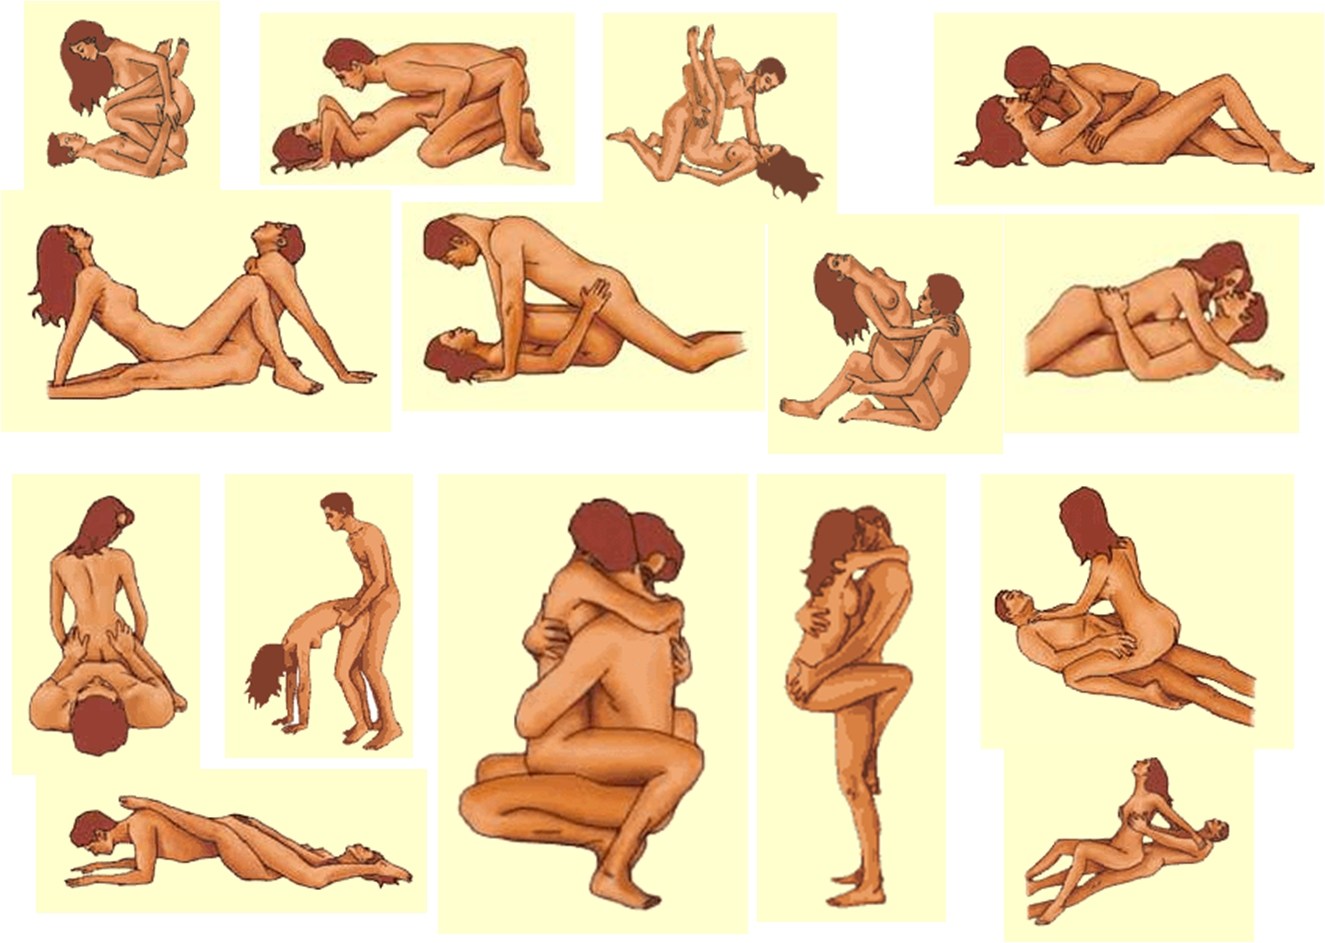 Pussy eating positions